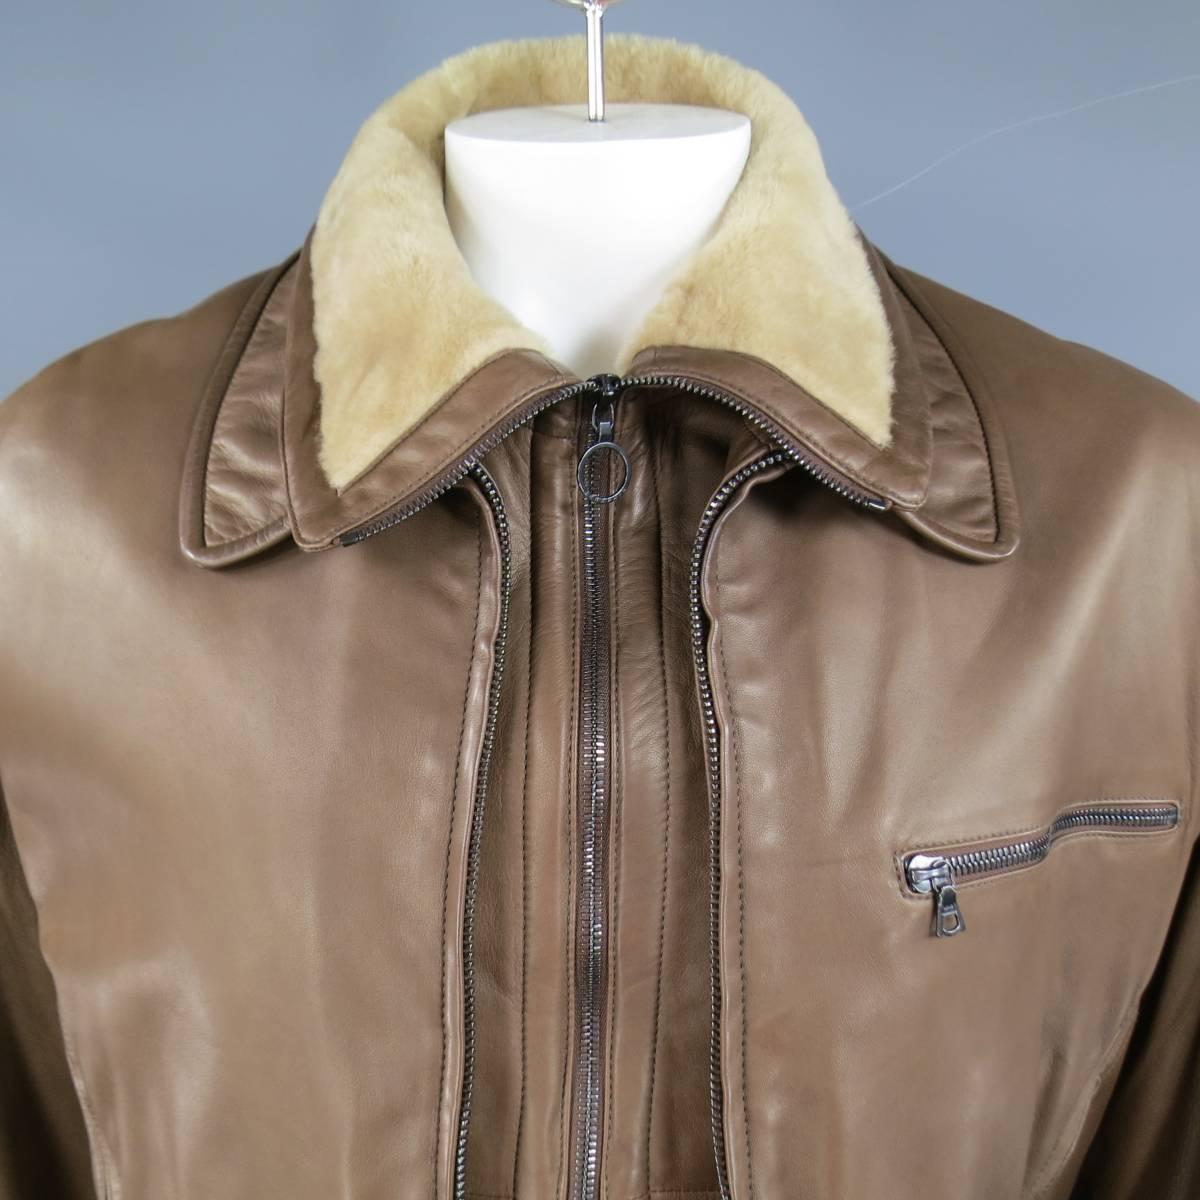 This unique bomber jacket by SERAPHIN comes in a soft light brown lamb leather and features a detachable shearling collar frontal layer, oversized silhouette, triple gunmetal zip pockets, and ribbed bands. Made in France.
 
Excellent Pre-Owned